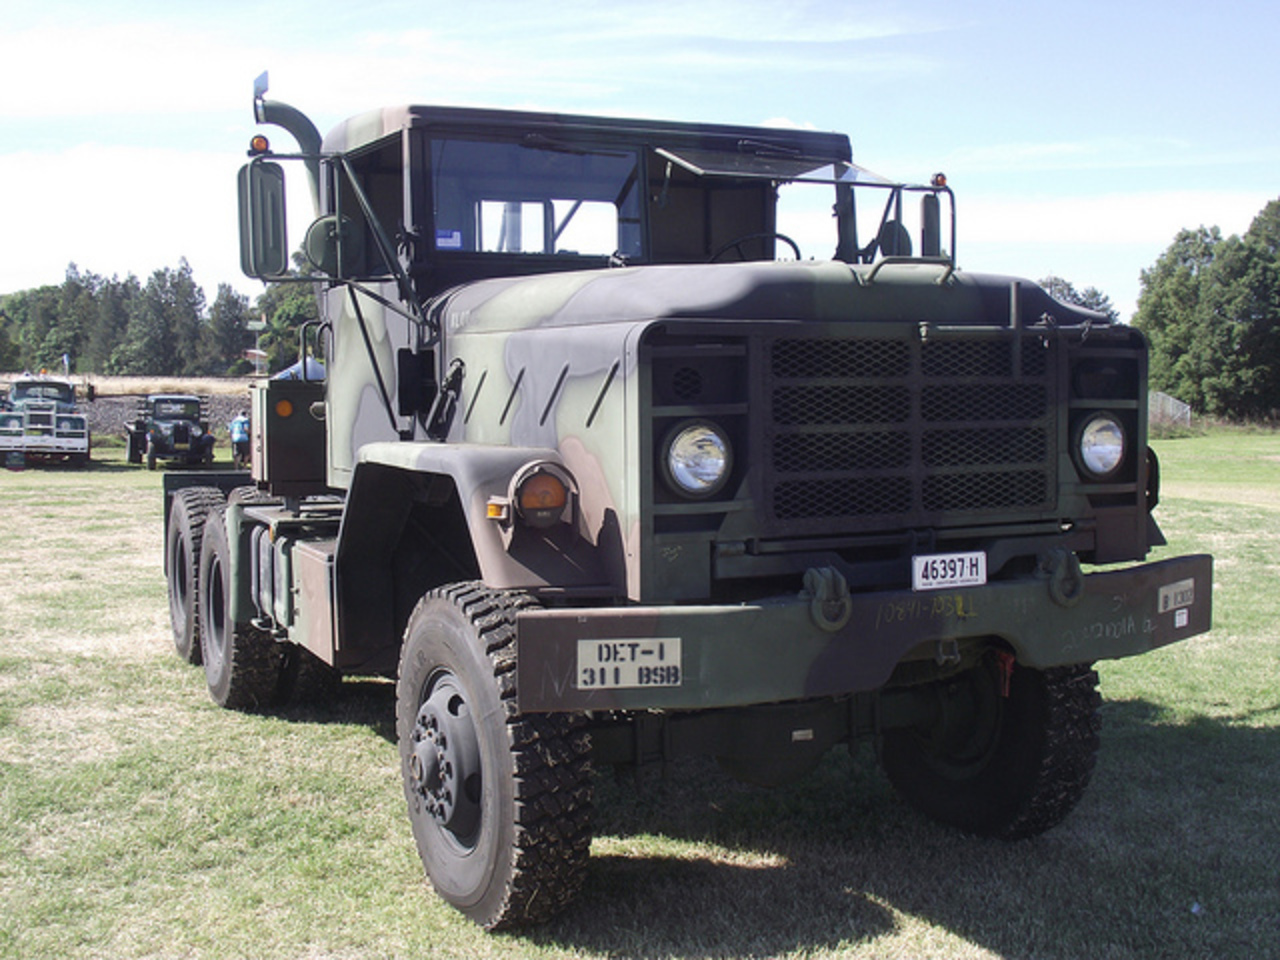 Flickr: The US Army trucks Pool